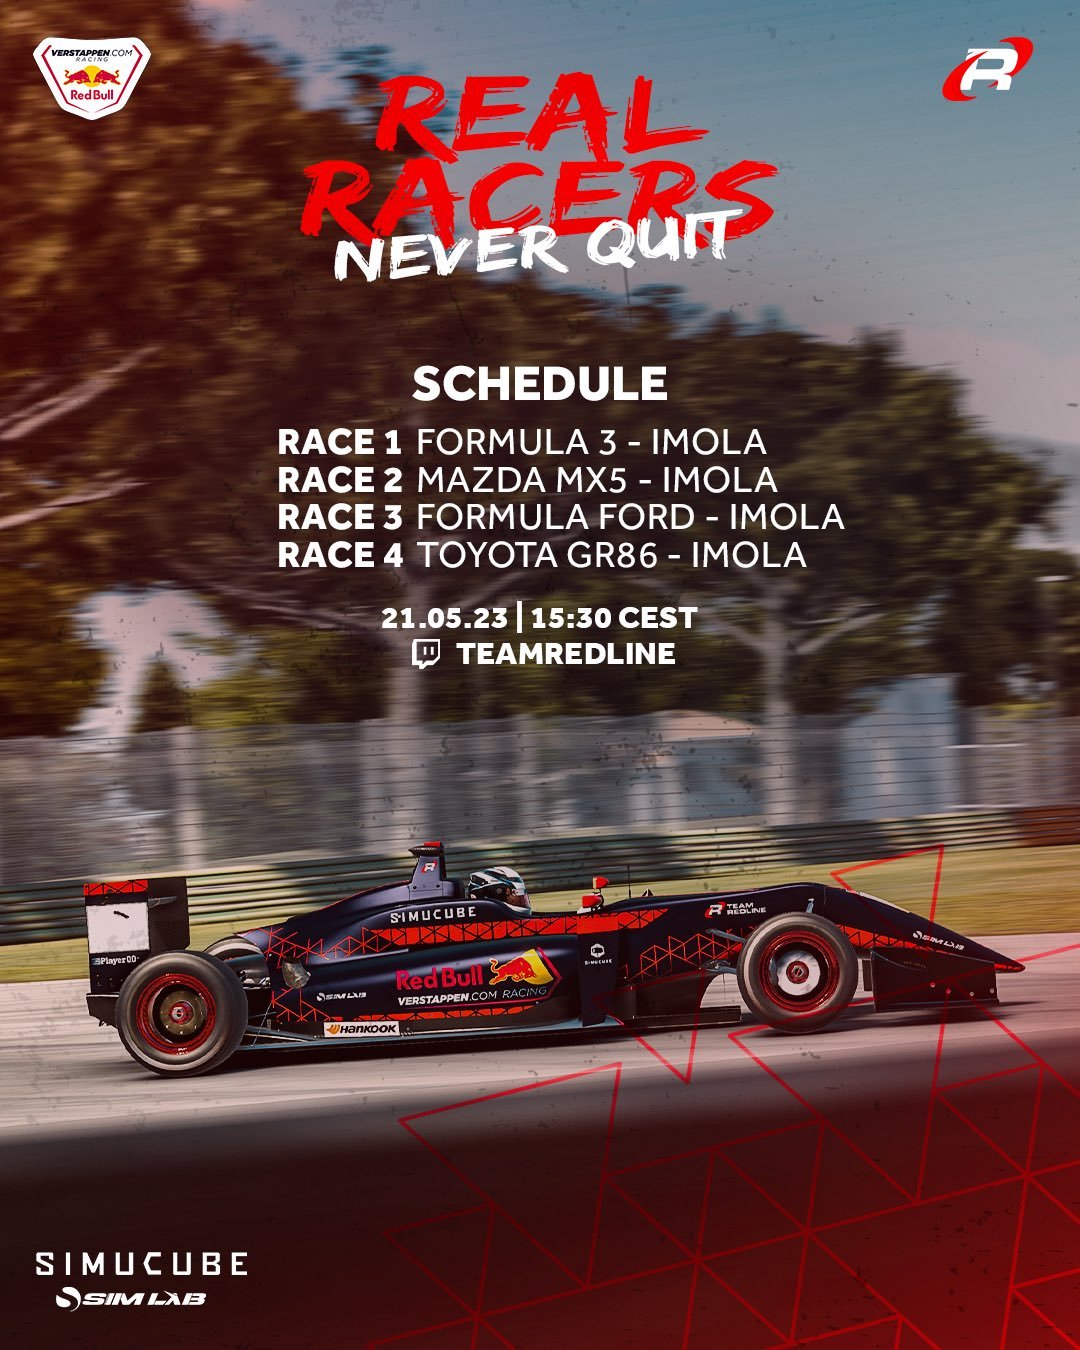 More information about "Real Racers Never Quit: evento iRacing con Verstappen per l'Emilia (21 Maggio ore 15,30)"